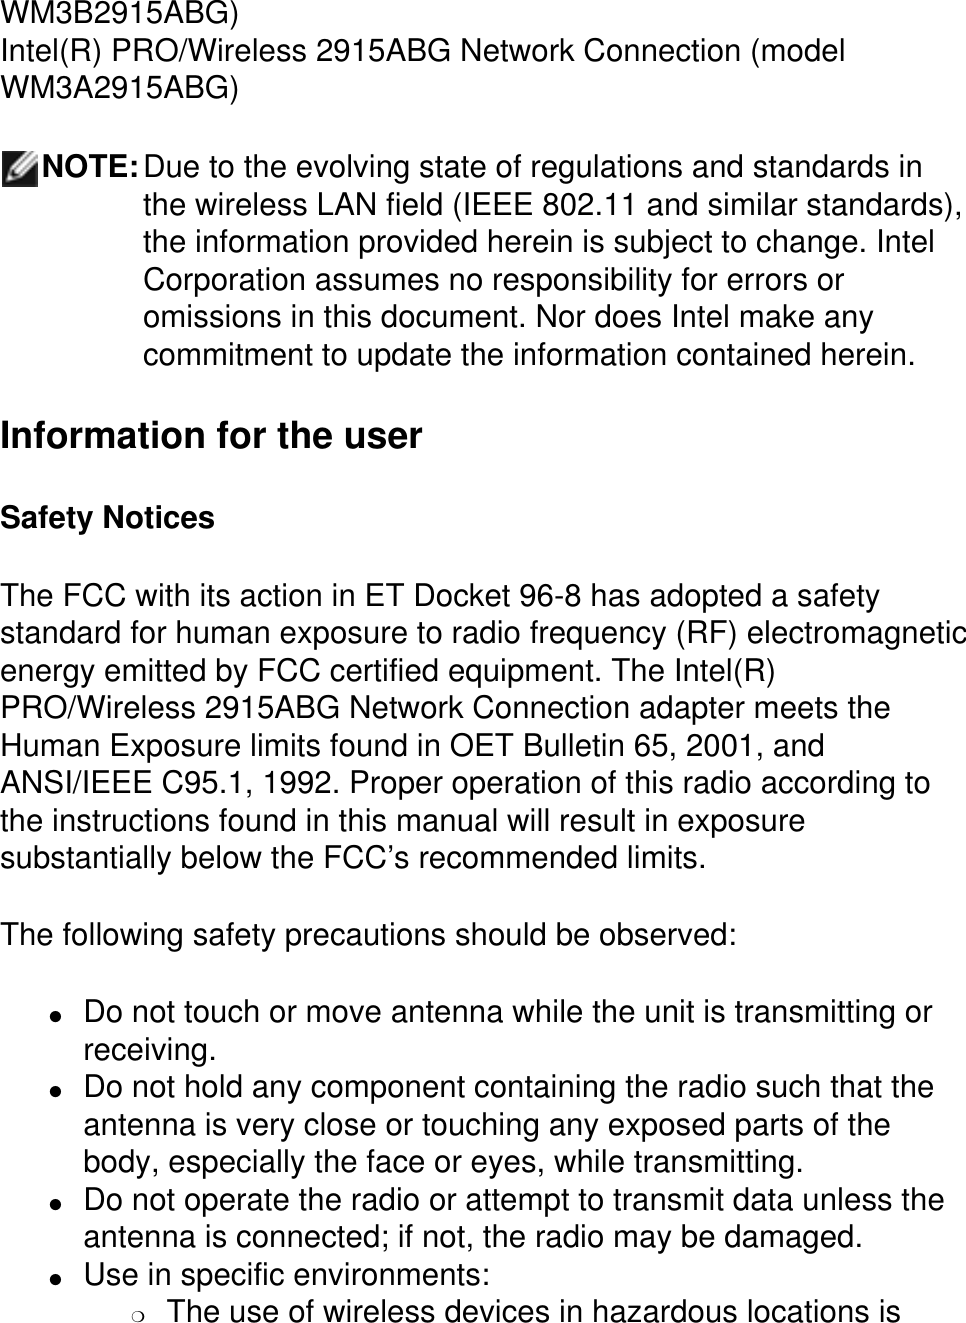 WM3B2915ABG)Intel(R) PRO/Wireless 2915ABG Network Connection (model WM3A2915ABG)NOTE:Due to the evolving state of regulations and standards in the wireless LAN field (IEEE 802.11 and similar standards), the information provided herein is subject to change. Intel Corporation assumes no responsibility for errors or omissions in this document. Nor does Intel make any commitment to update the information contained herein.Information for the userSafety NoticesThe FCC with its action in ET Docket 96-8 has adopted a safety standard for human exposure to radio frequency (RF) electromagnetic energy emitted by FCC certified equipment. The Intel(R) PRO/Wireless 2915ABG Network Connection adapter meets the Human Exposure limits found in OET Bulletin 65, 2001, and ANSI/IEEE C95.1, 1992. Proper operation of this radio according to the instructions found in this manual will result in exposure substantially below the FCC’s recommended limits.The following safety precautions should be observed:●     Do not touch or move antenna while the unit is transmitting or receiving. ●     Do not hold any component containing the radio such that the antenna is very close or touching any exposed parts of the body, especially the face or eyes, while transmitting. ●     Do not operate the radio or attempt to transmit data unless the antenna is connected; if not, the radio may be damaged. ●     Use in specific environments: ❍     The use of wireless devices in hazardous locations is 